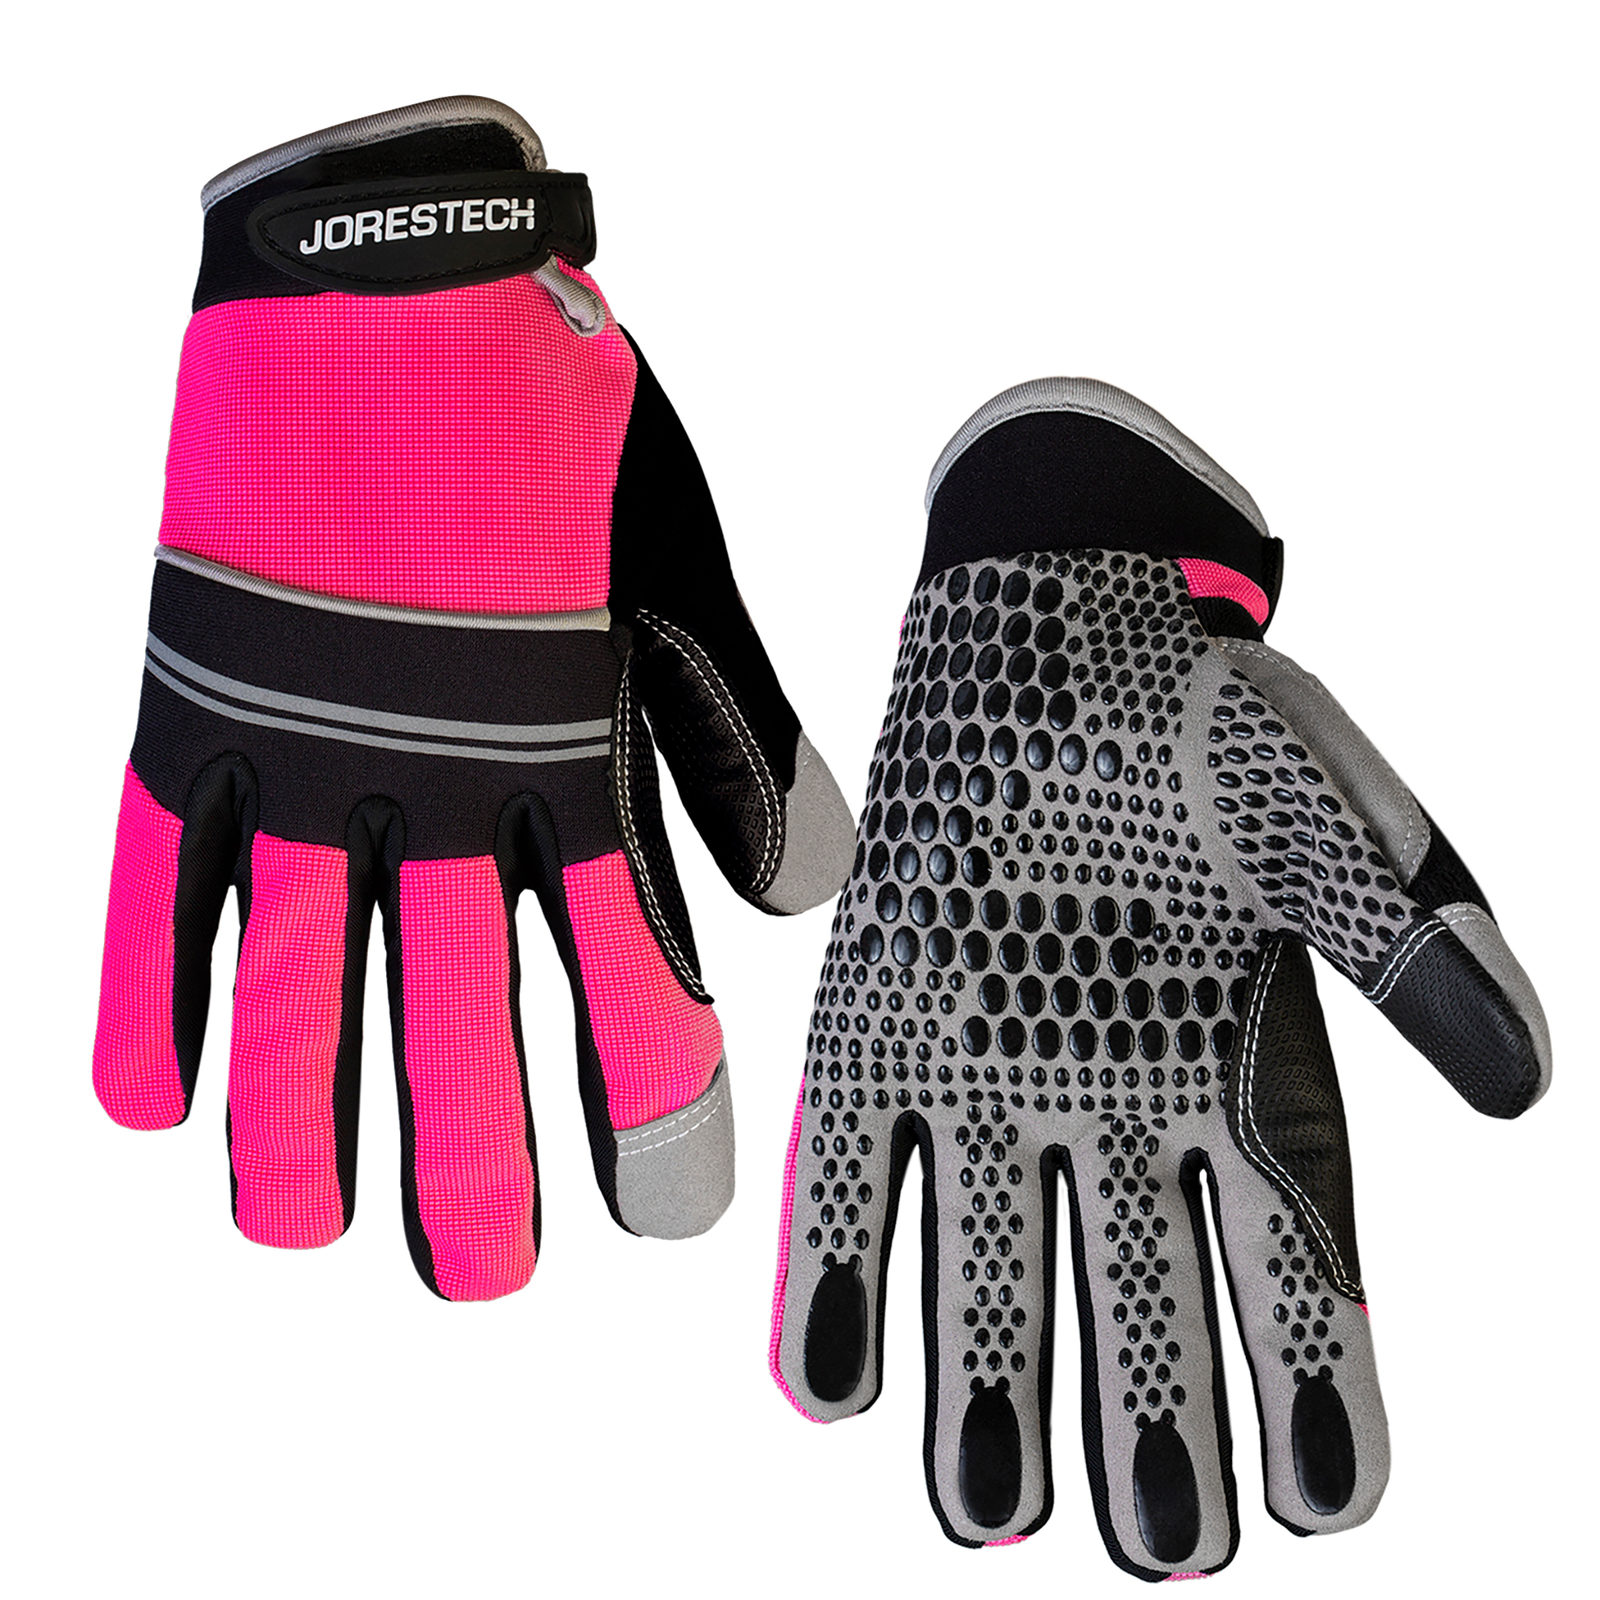  One pair of pink JORESTECH safety work gloves with anti slip silicone black dotted palms